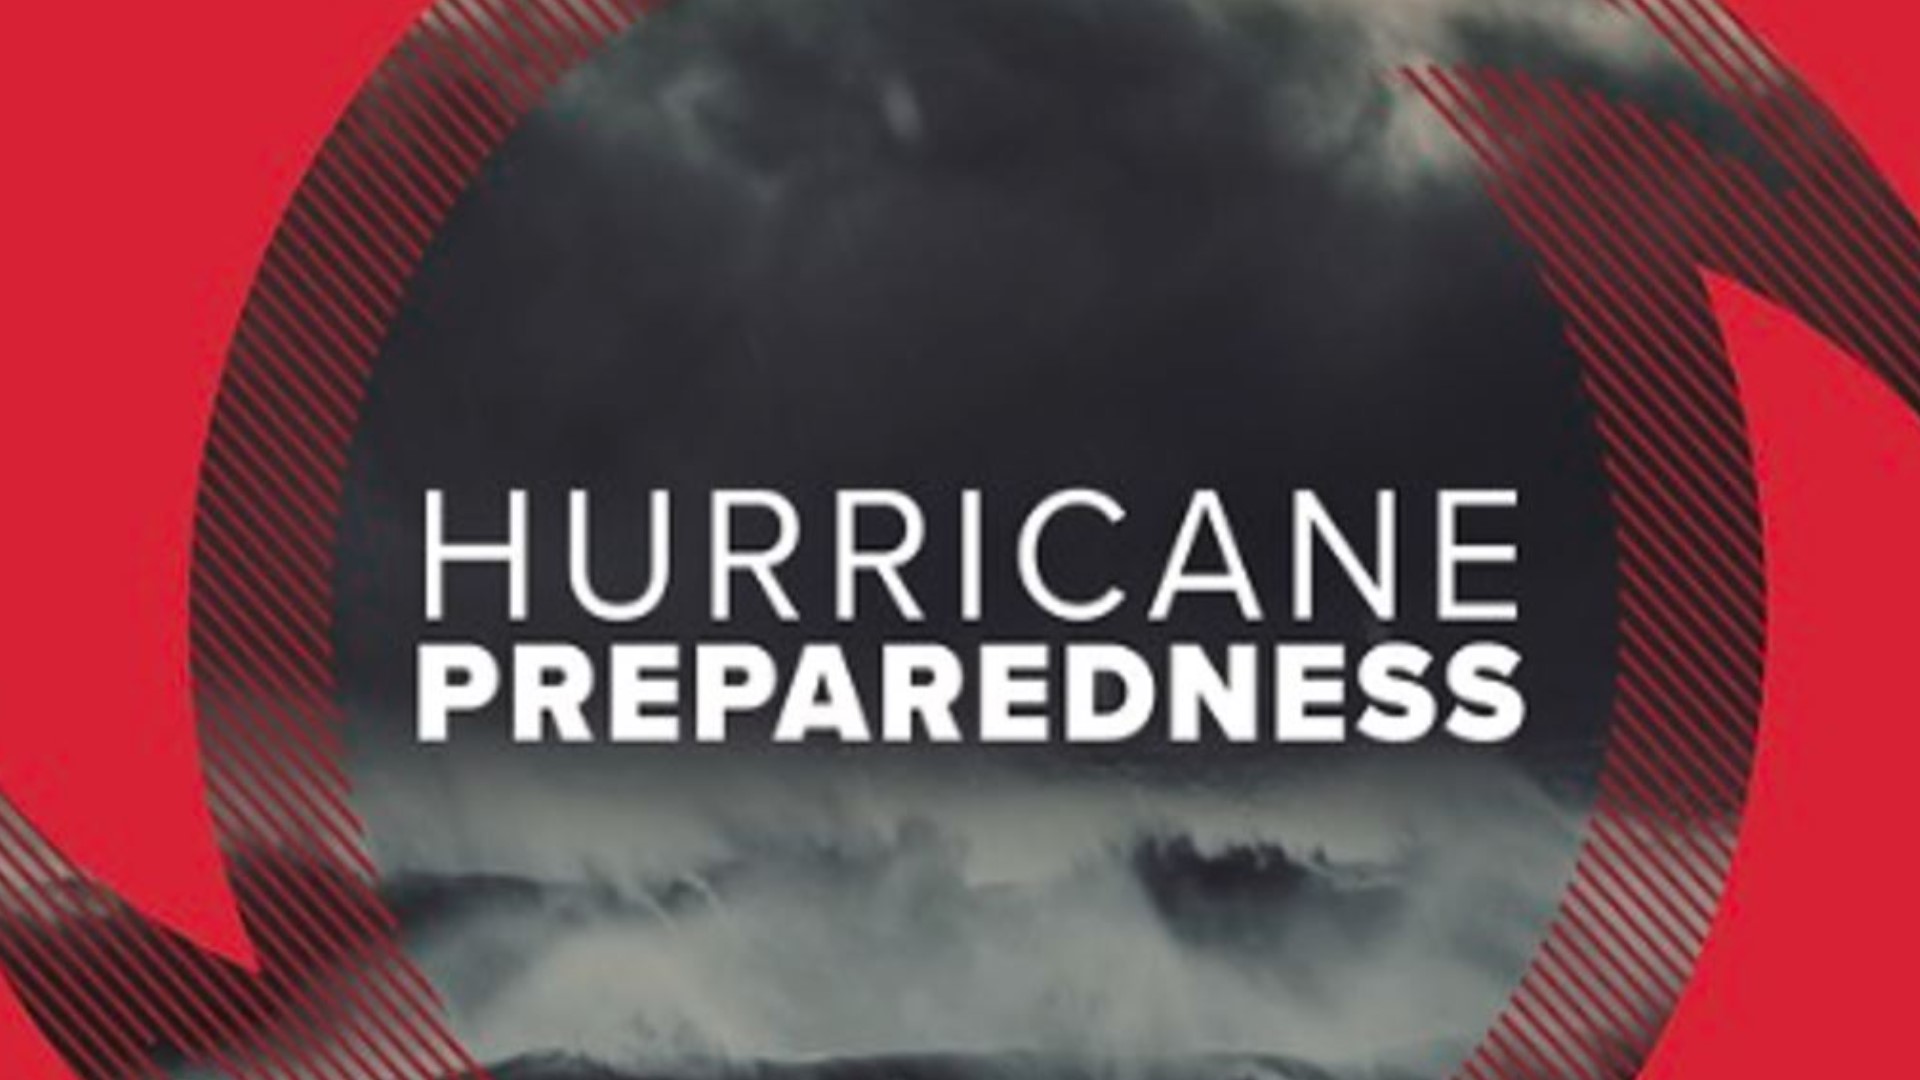 If you’re sheltering in place during a hurricane or tropical storm, keep this guidance in mind.